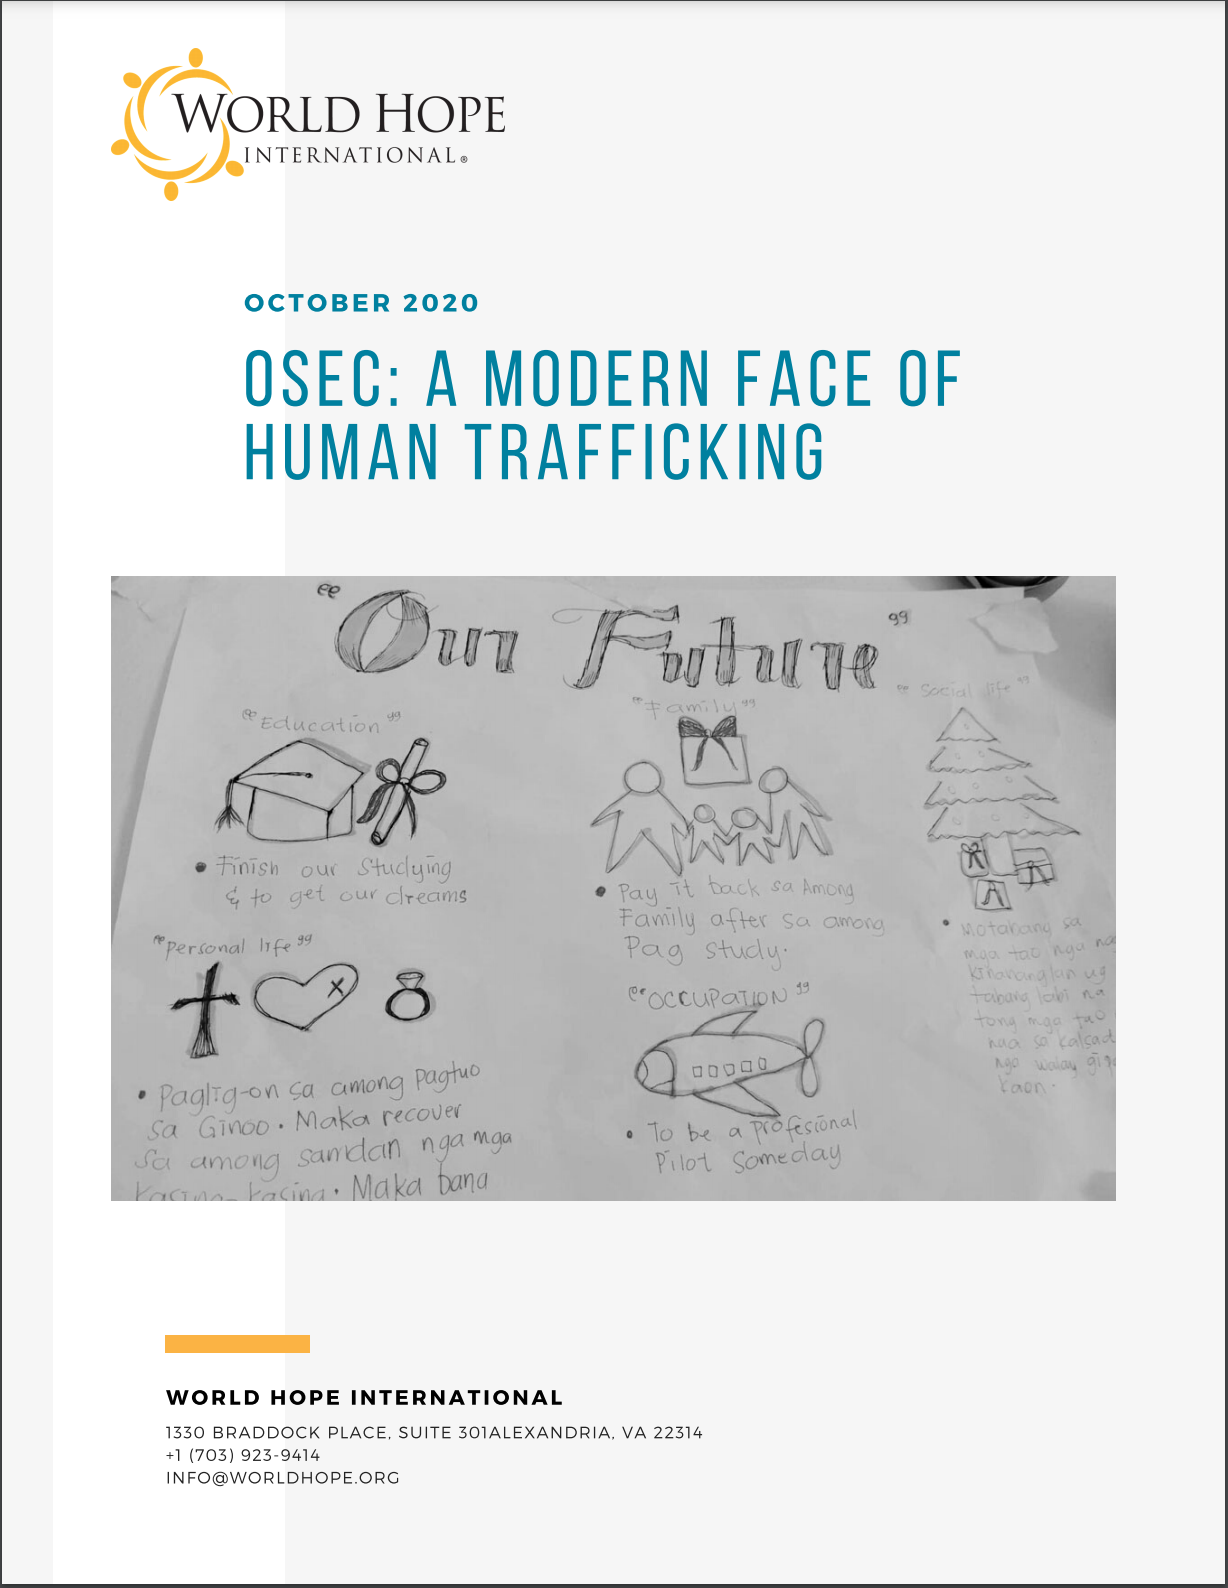 OSEC: A MODERN FACE OF HUMAN TRAFFICKING